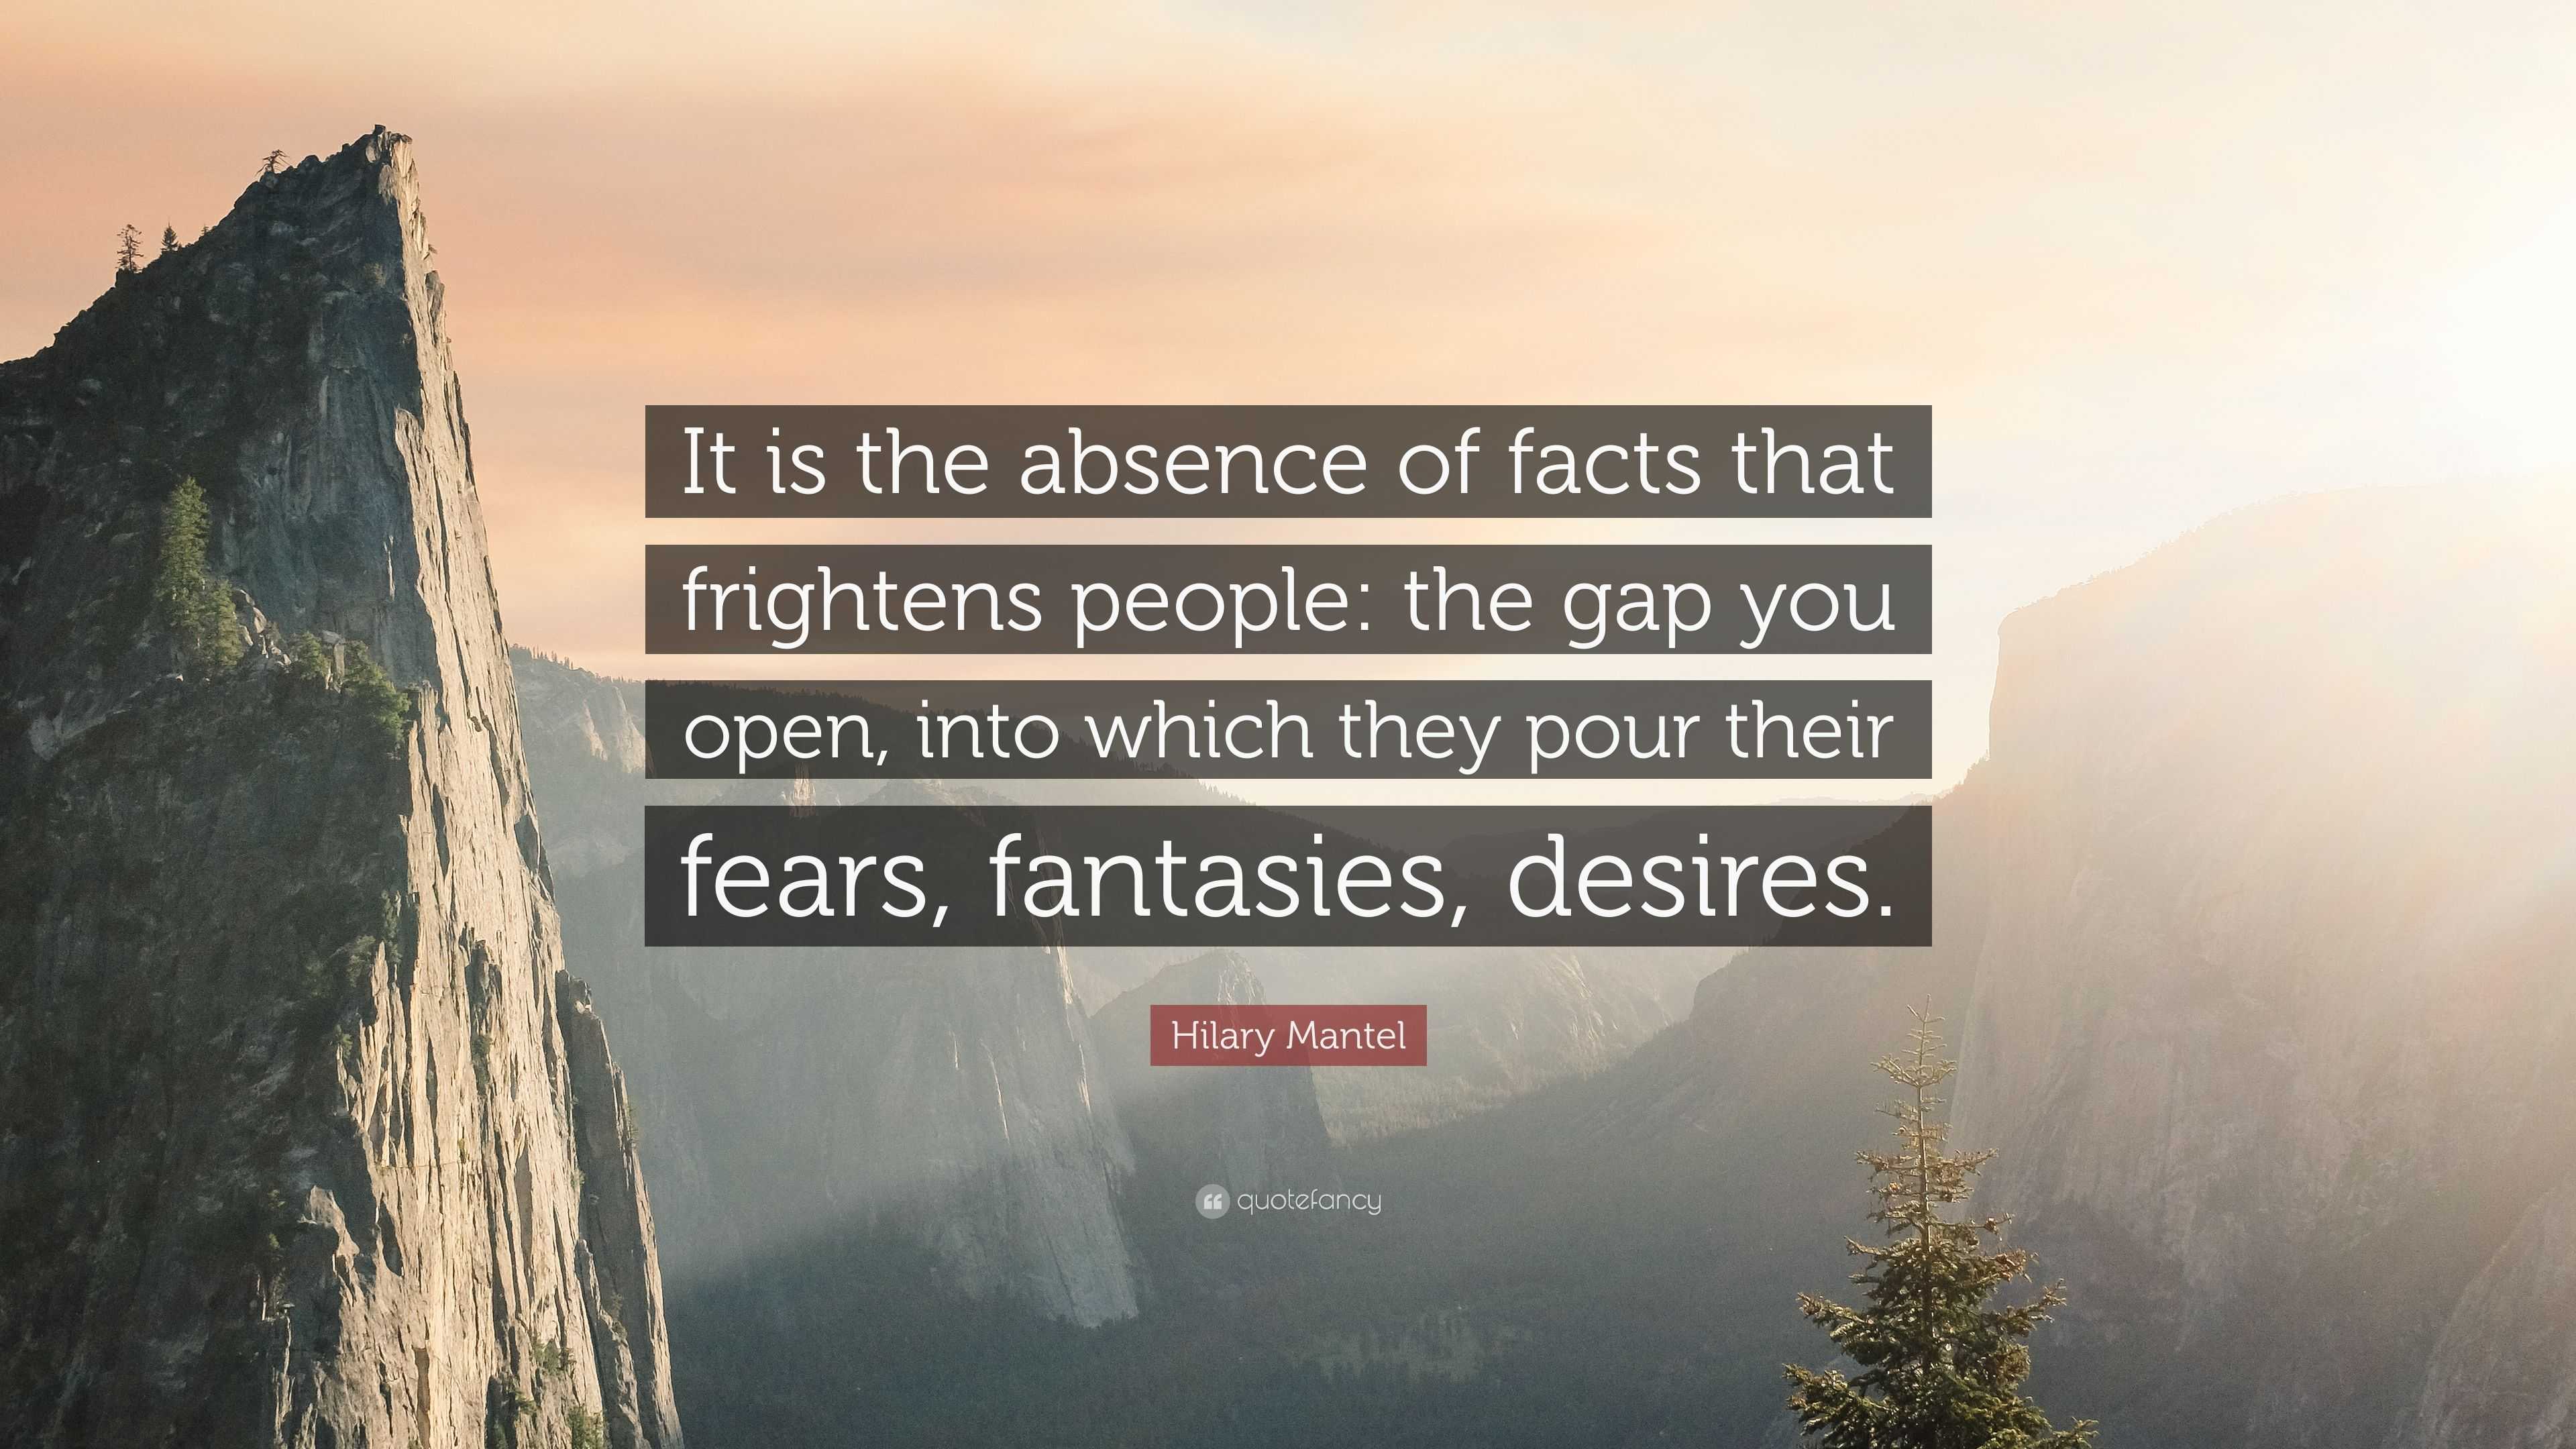 Hilary Mantel Quote: “It is the absence of facts that frightens people ...